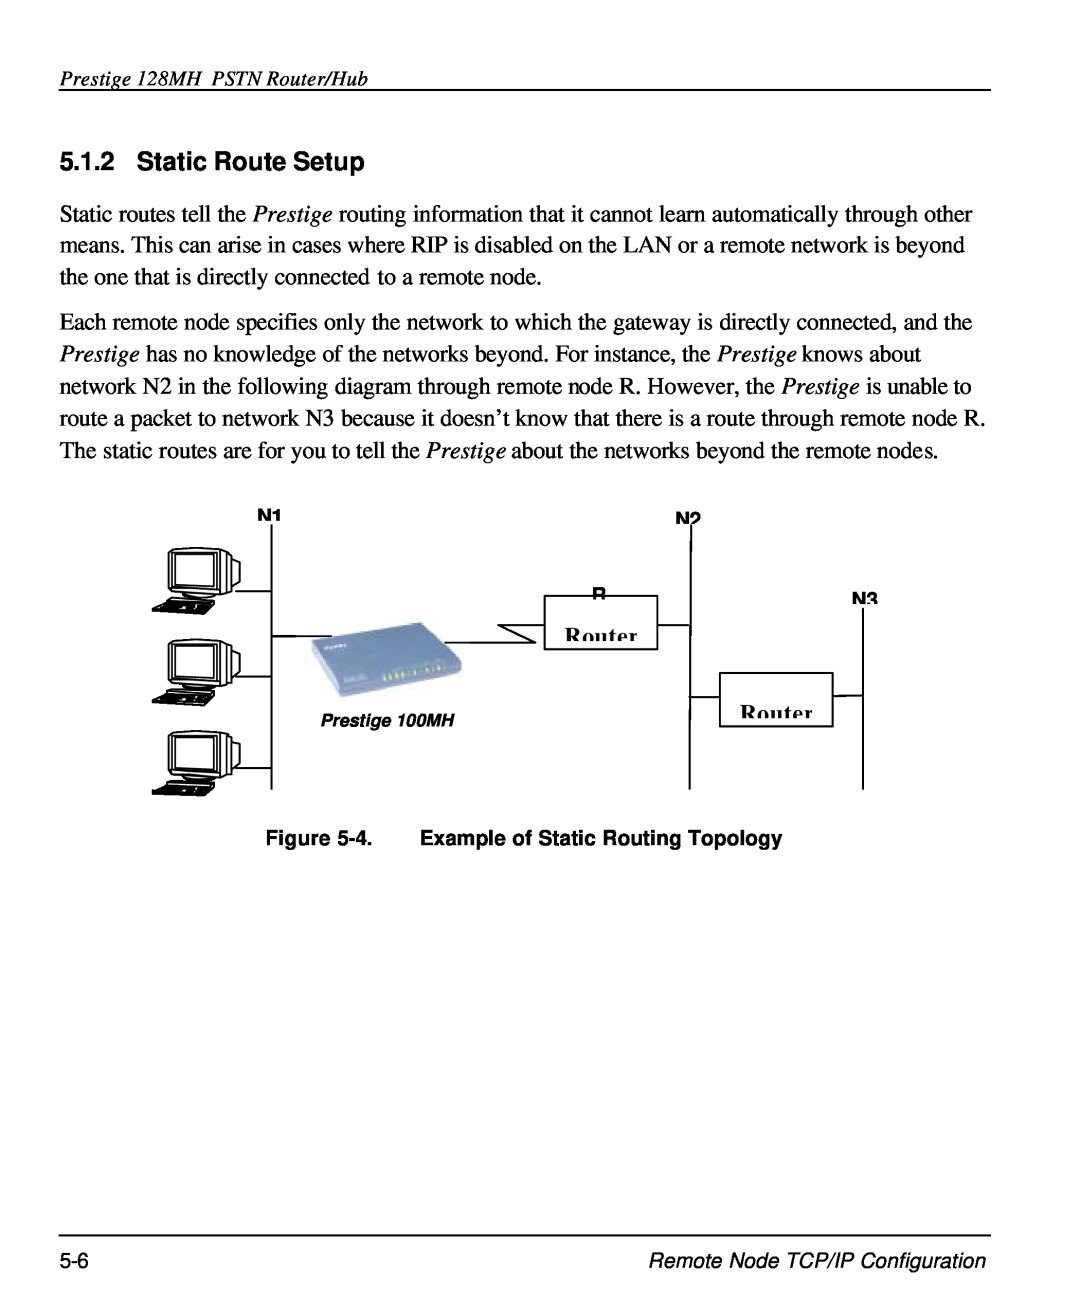 ZyXEL Communications 128MH user manual Static Route Setup, Router, N1 R, N2 N3, 4. Example of Static Routing Topology 